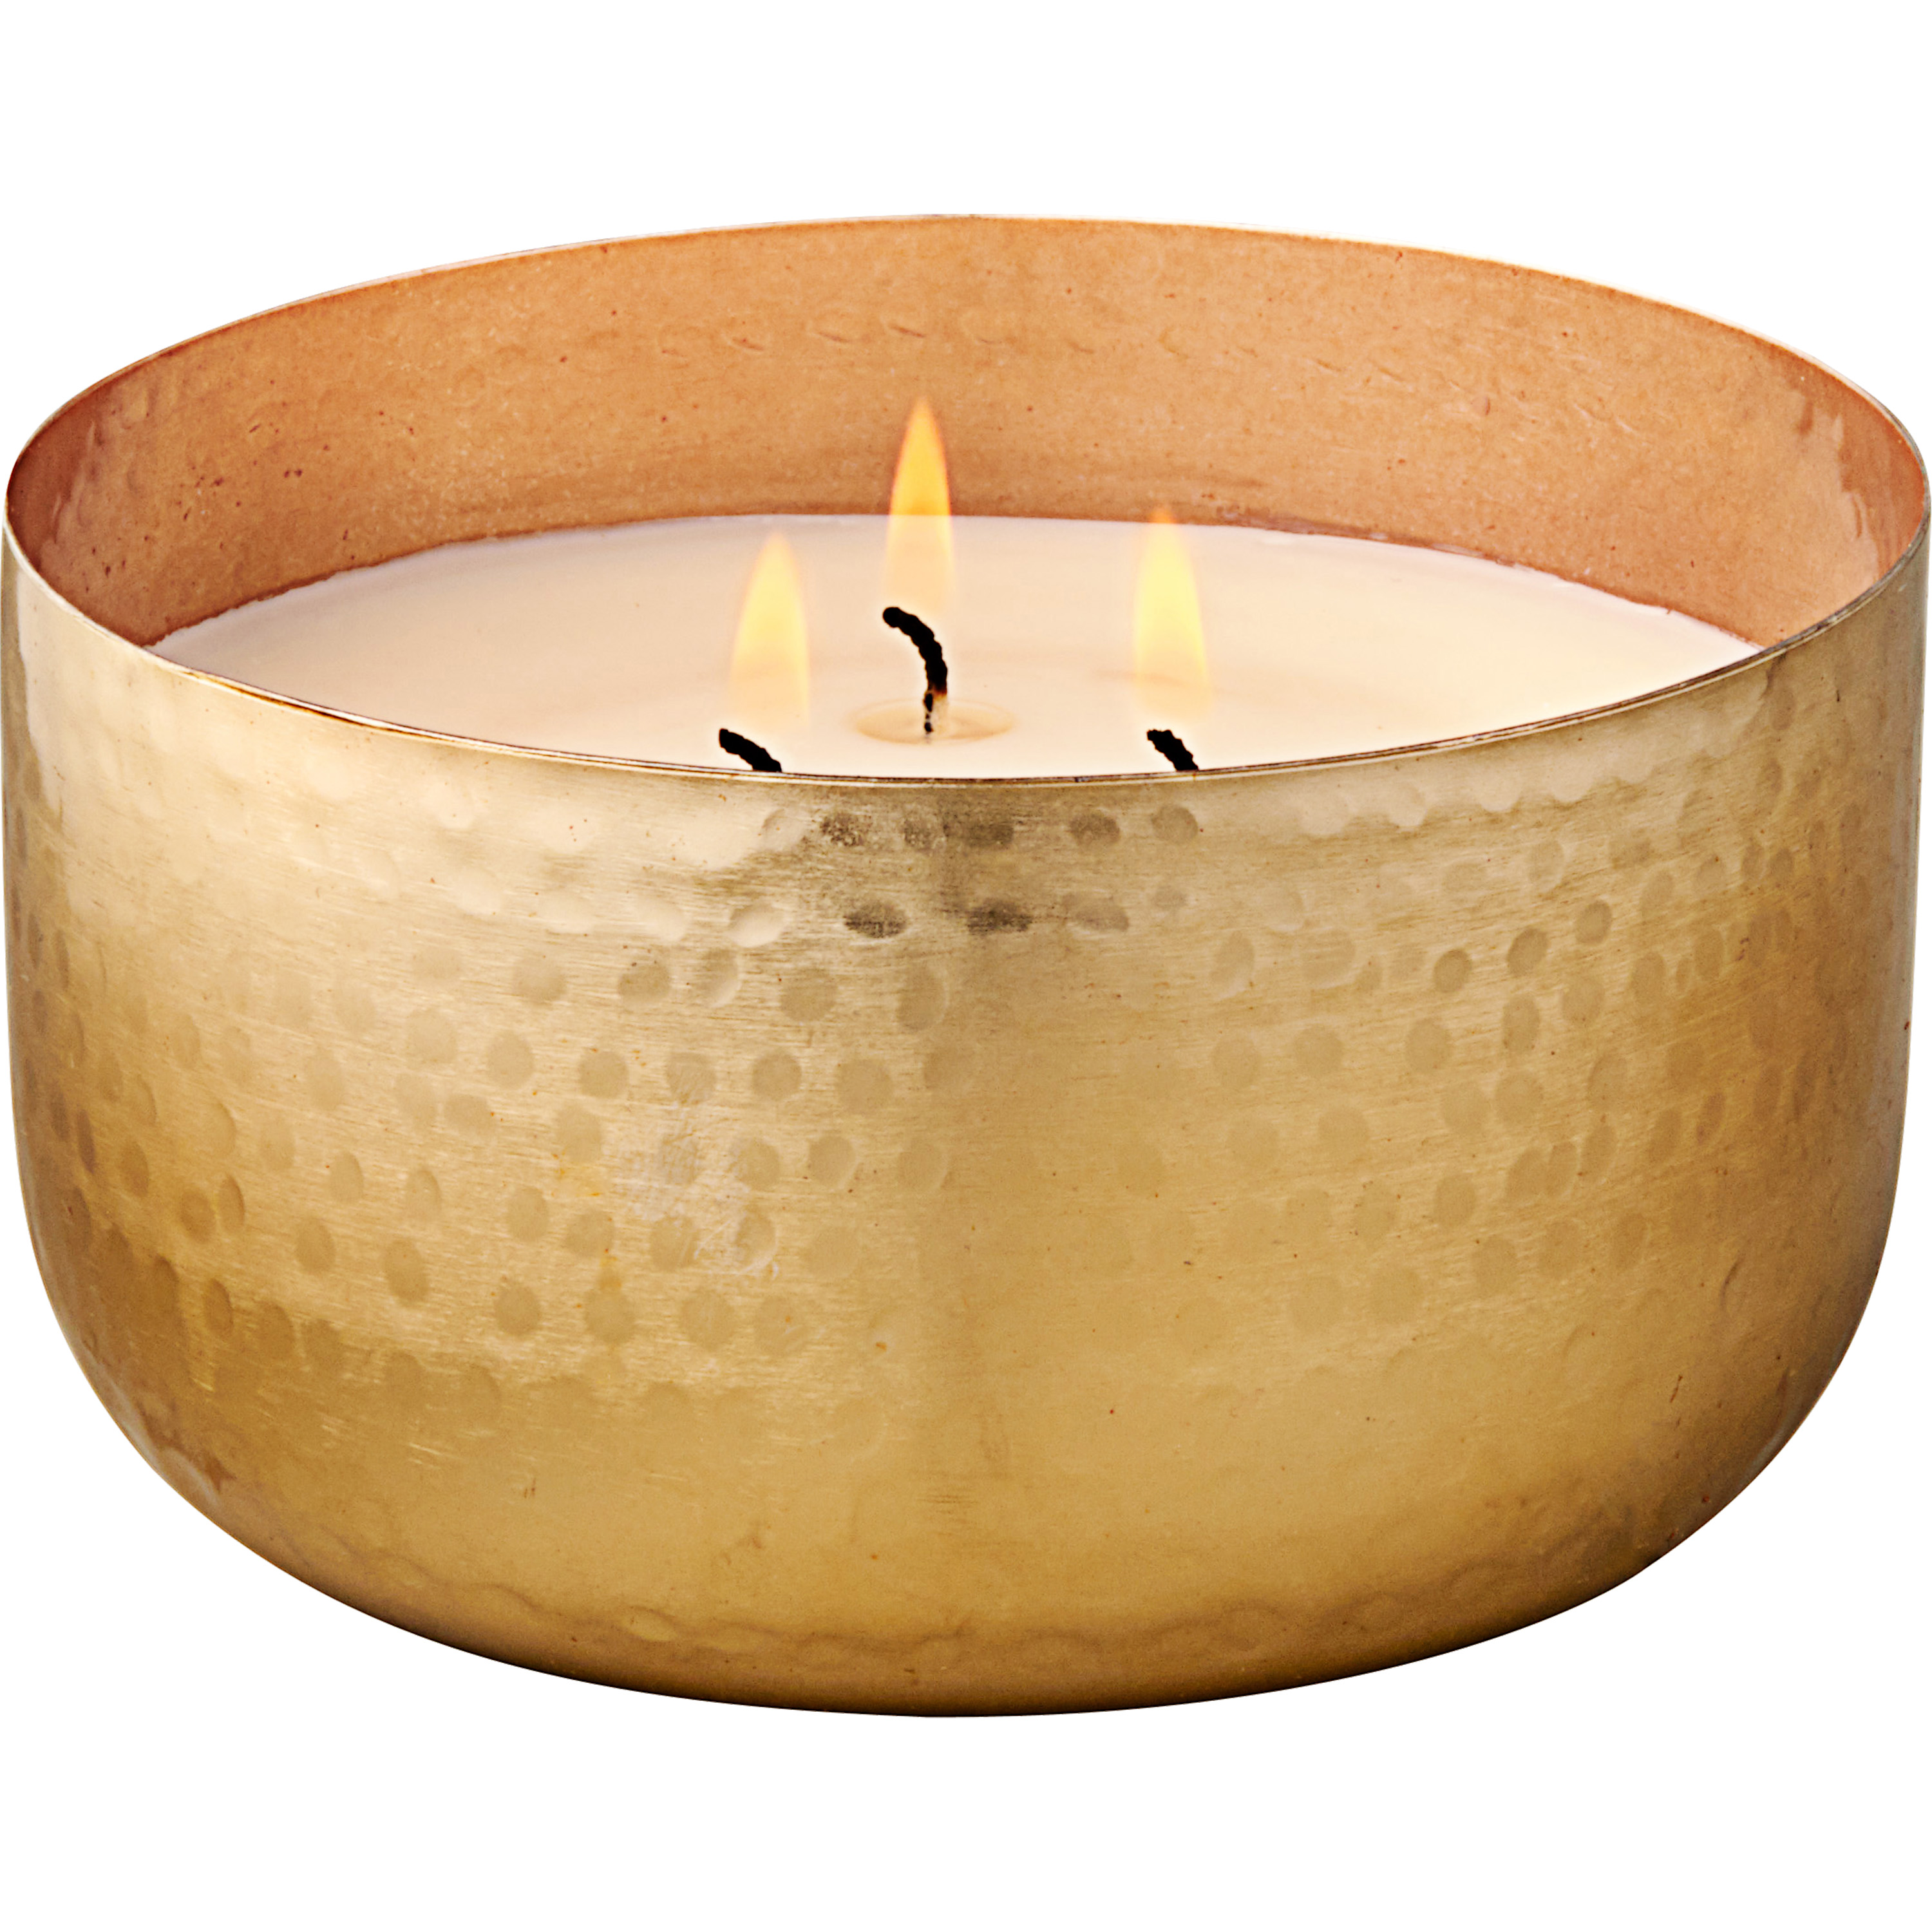 Better Homes & Gardens Gold Hammered Metal Bowl 3-Wick Soft Cashmere Amber Candle - image 1 of 3